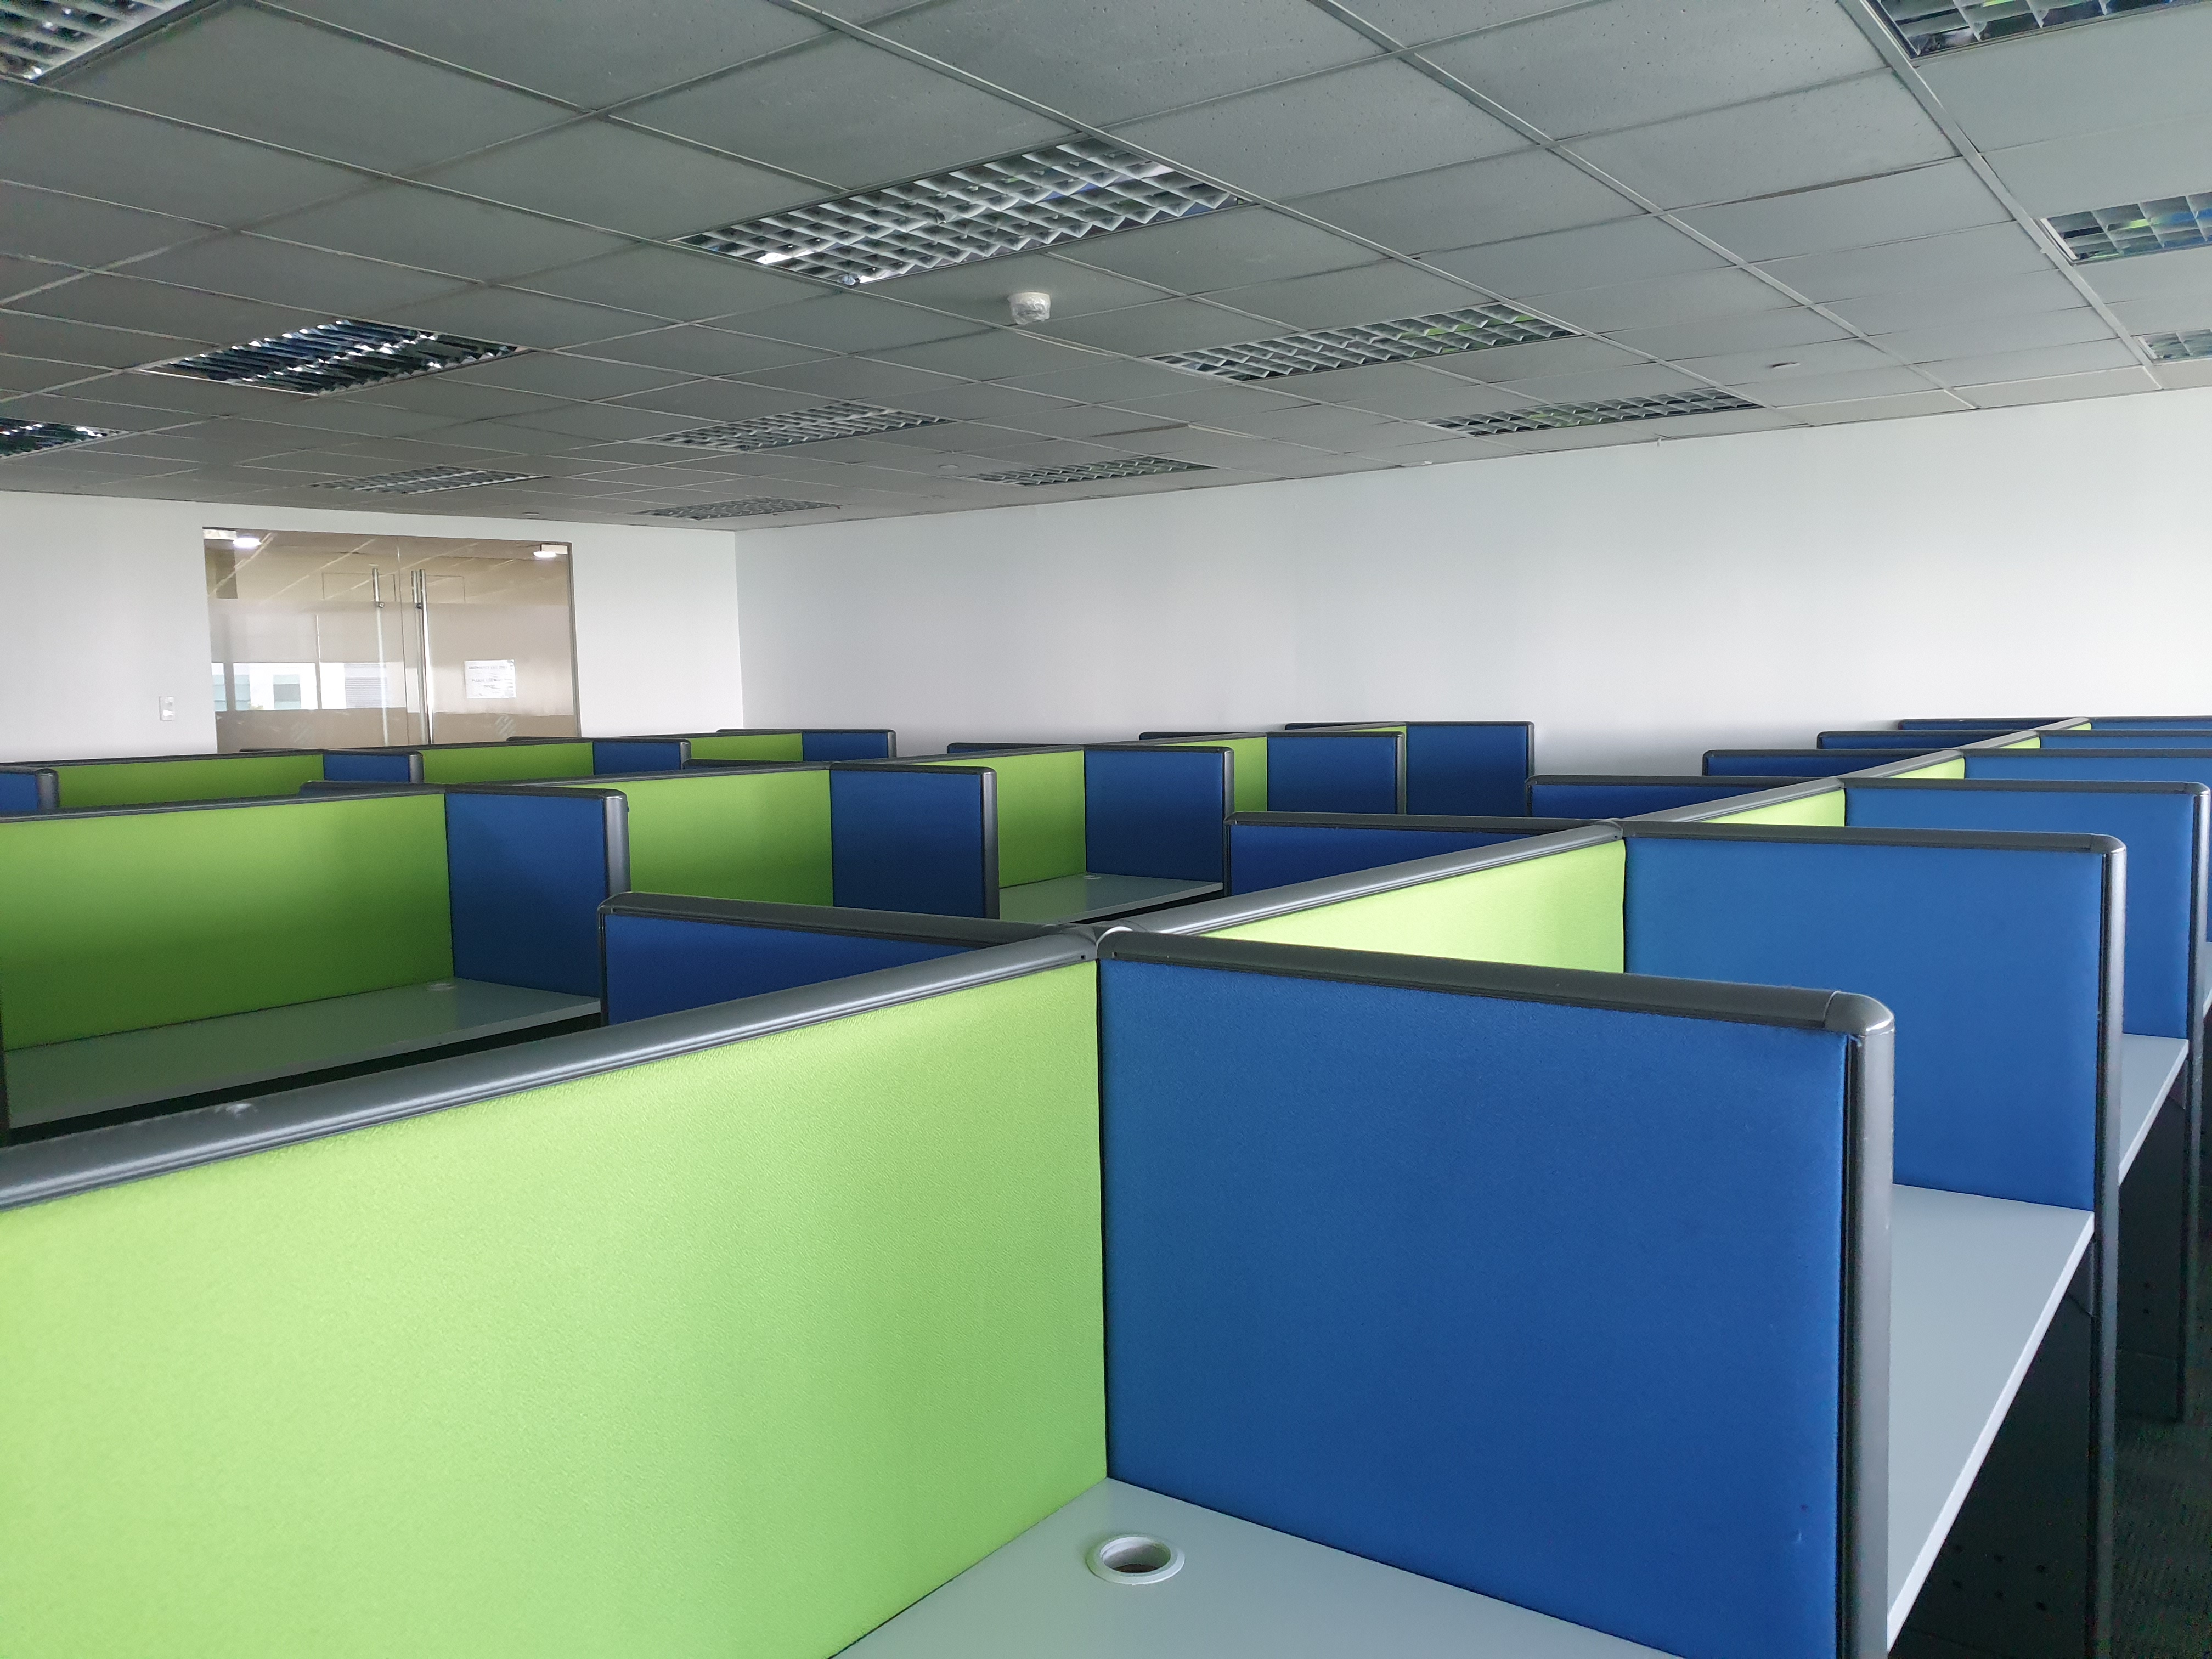 117.83 sqm Office Space for Lease in Harvester Corporate Center, Quezon City